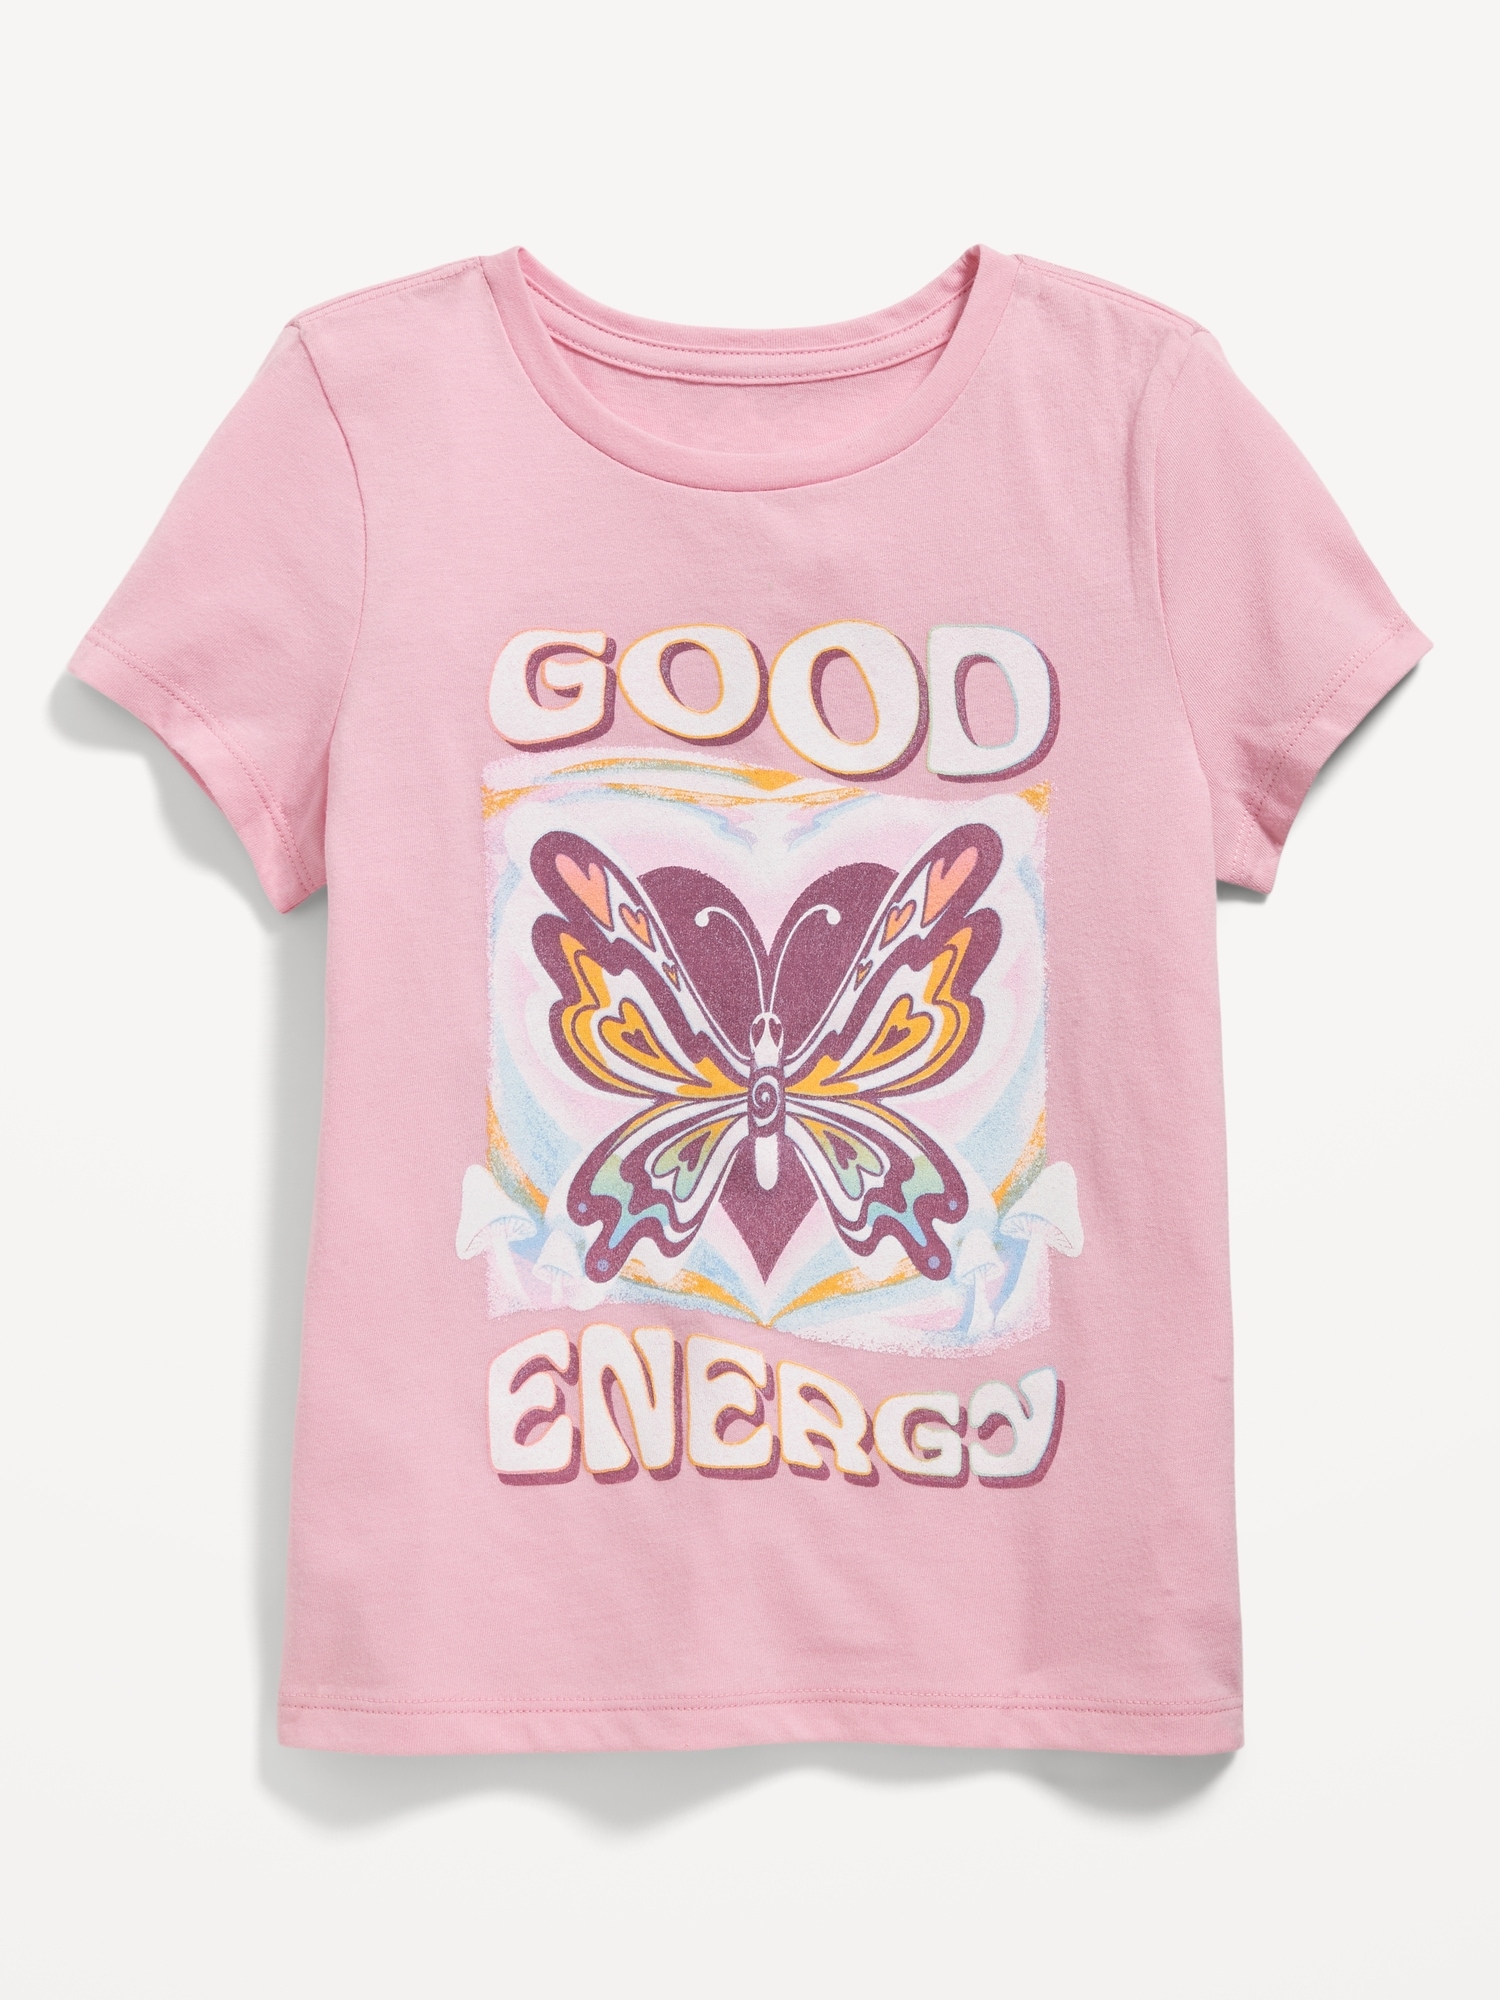 Old Navy Short-Sleeve Graphic T-Shirt for Girls pink. 1